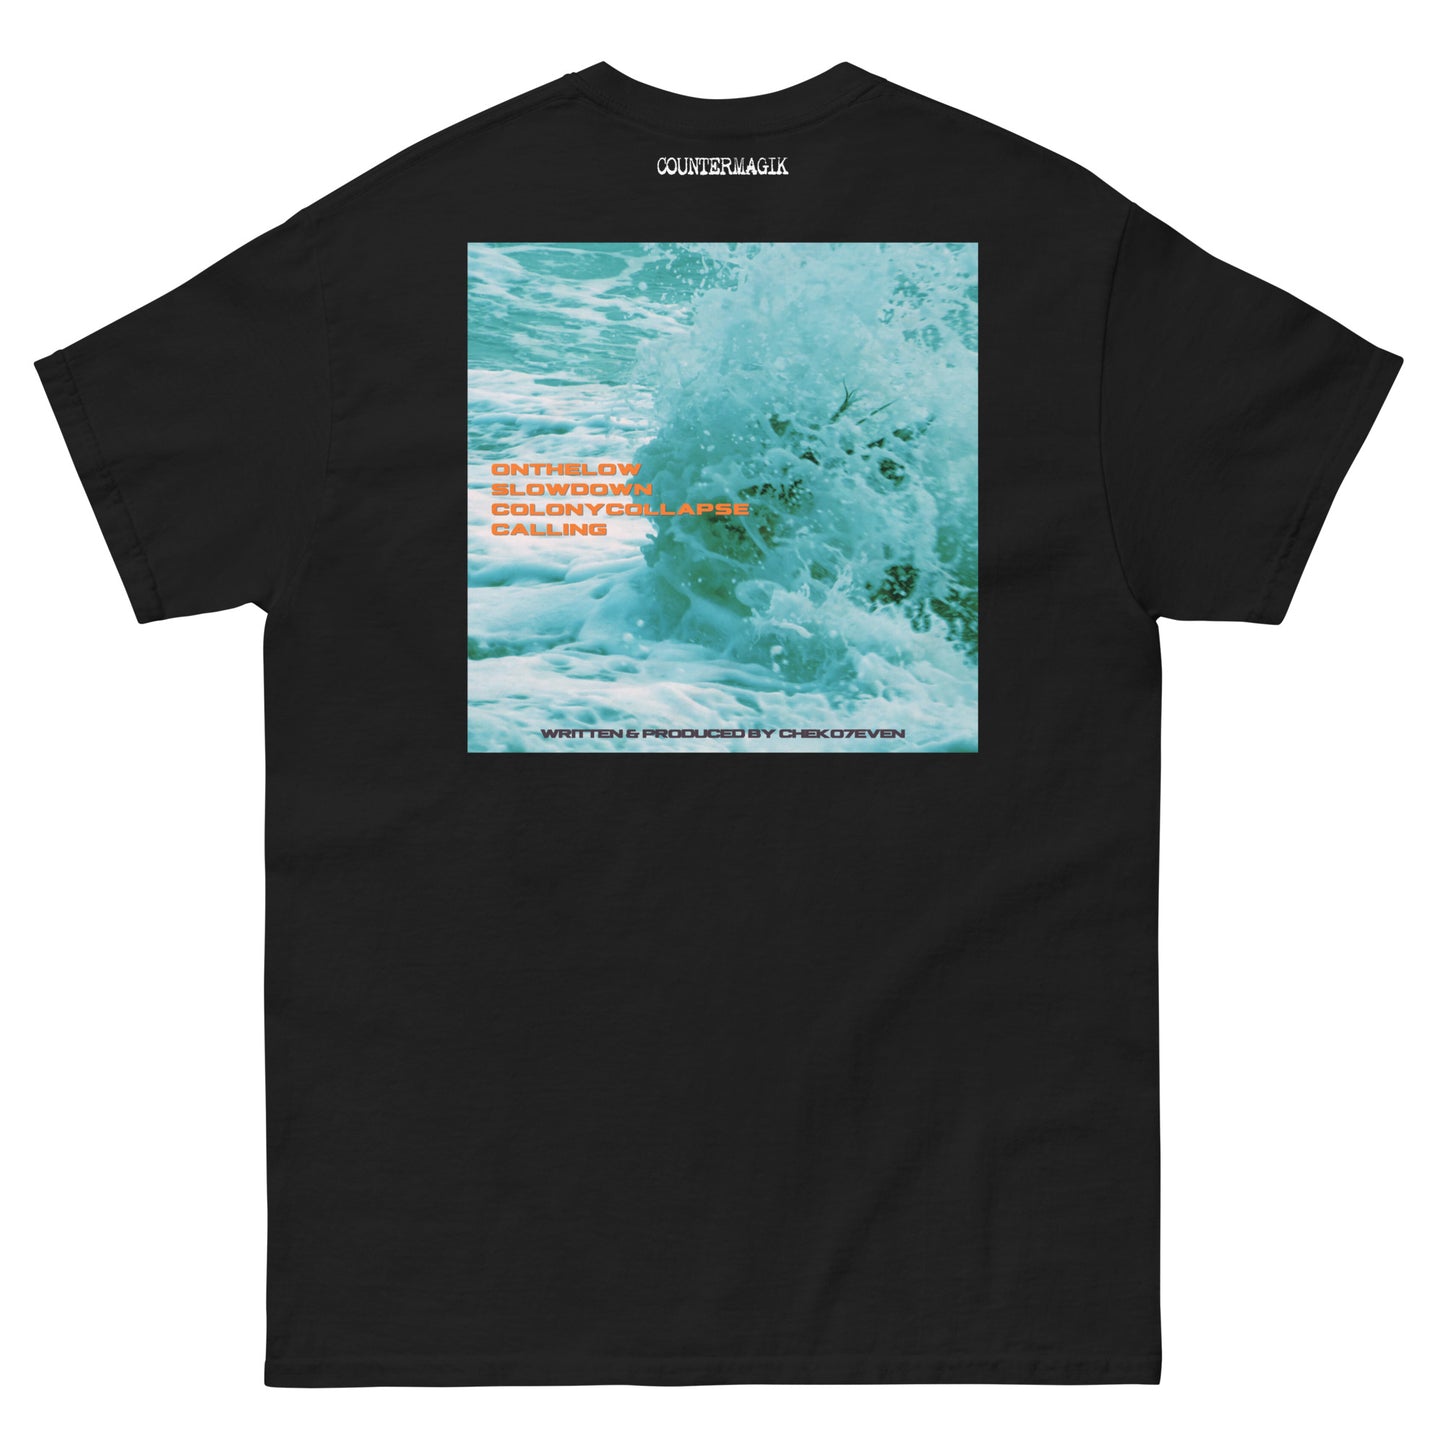 4 A Time Being - Cover Tee